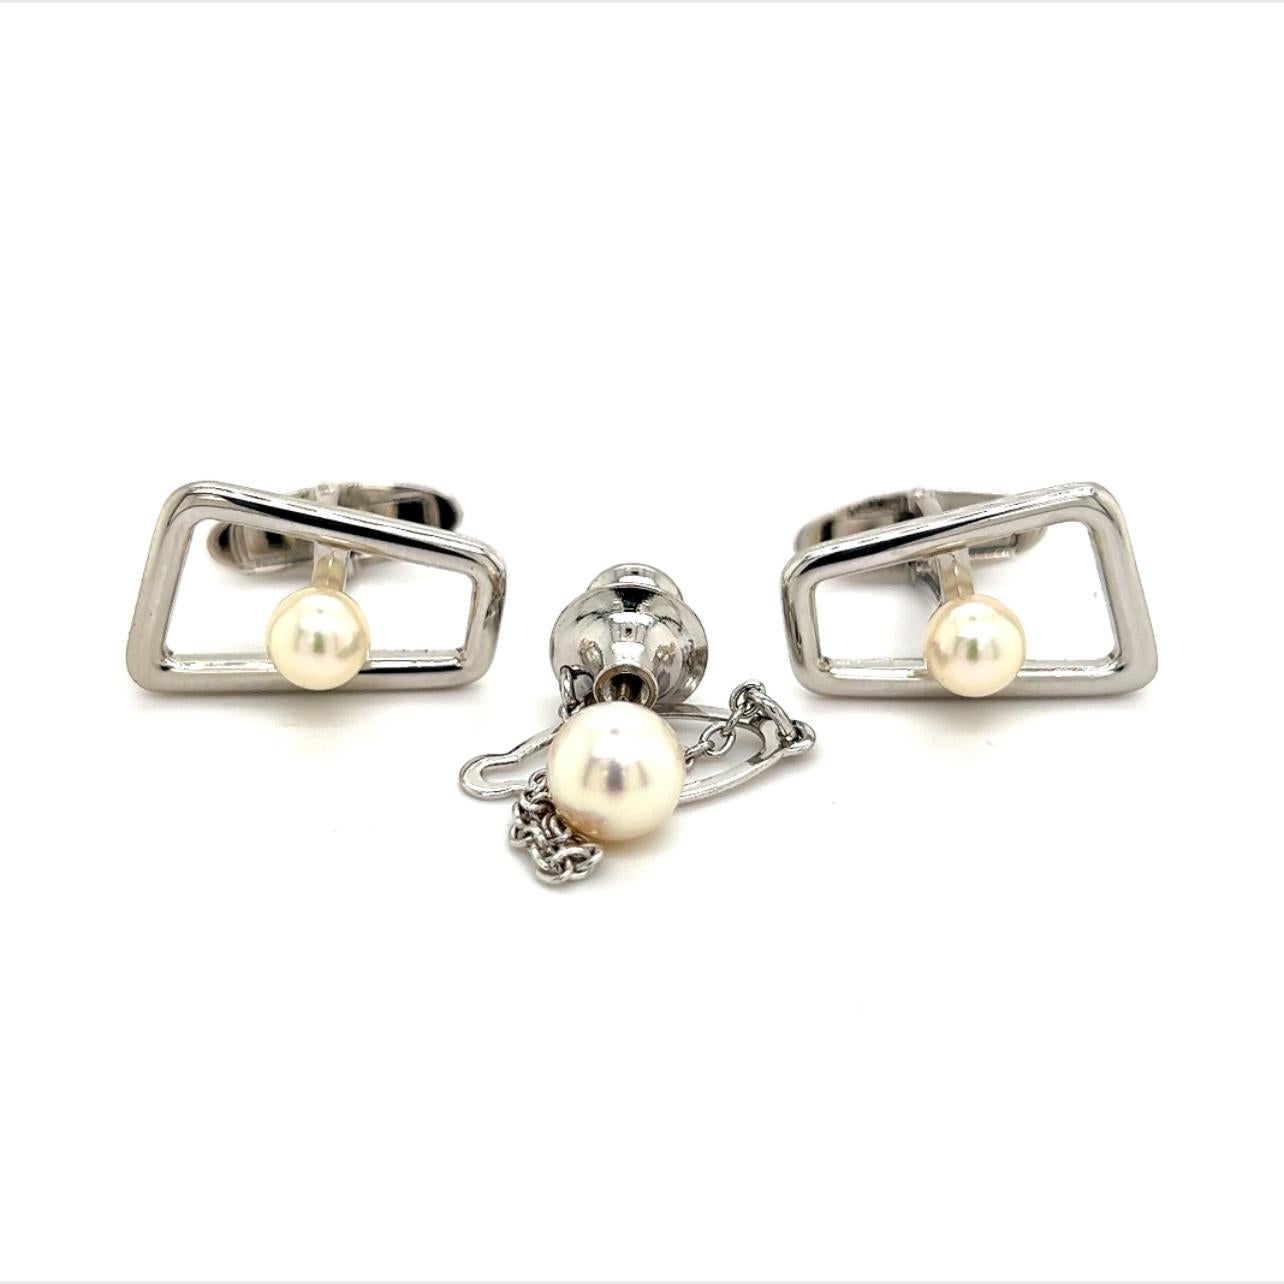 Men's Mikimoto Estate Akoya Pearl Cufflinks and Tie Pin Sterling Silver